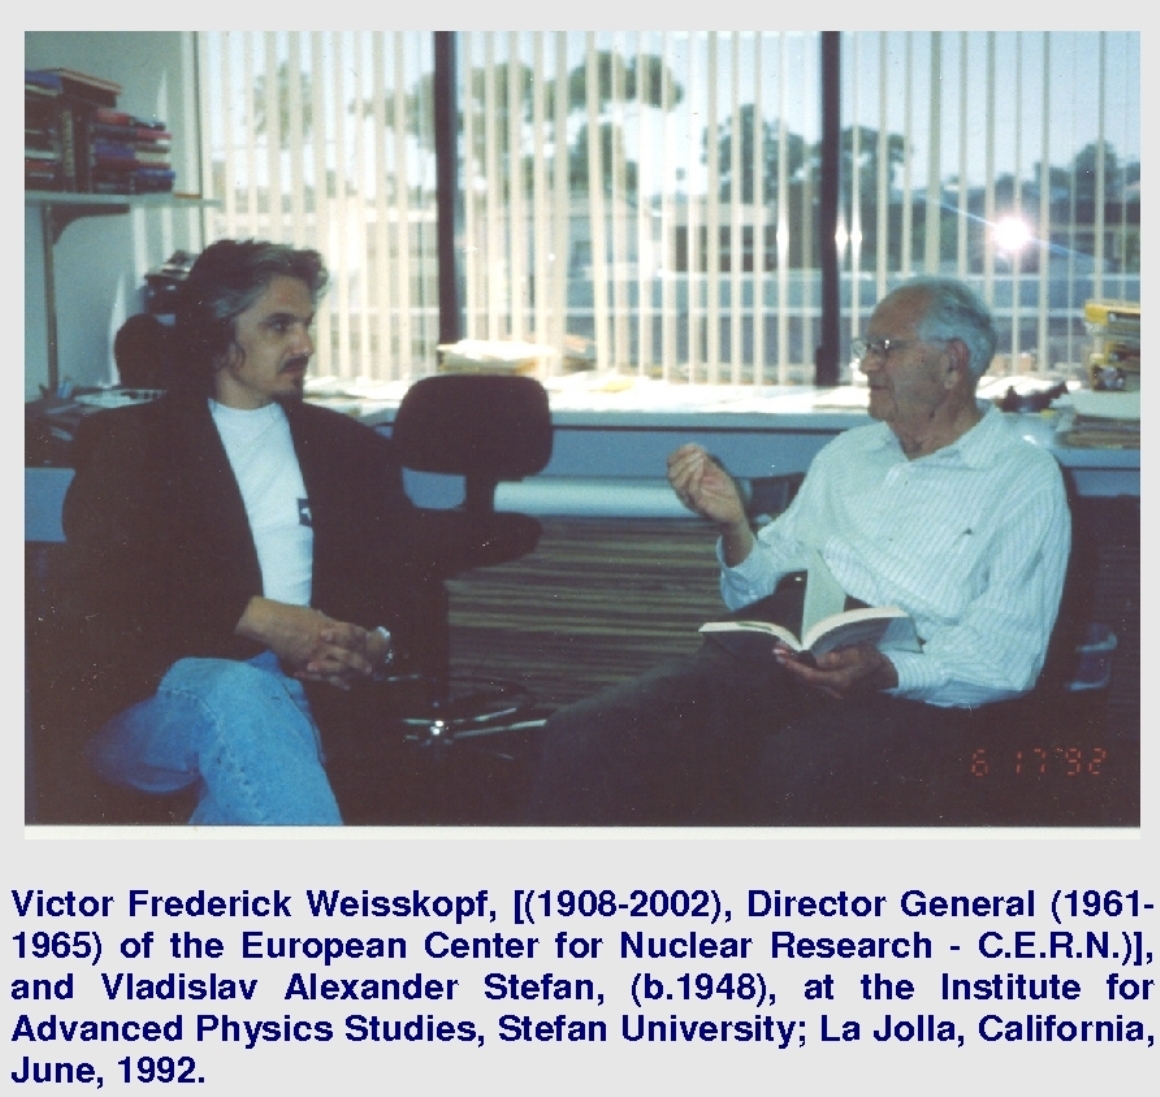 Victor Frederick Weisskopf, [(1908-2002), Director General (1961-1965) of the European Center for Nuclear Research - C.E.R.N.)], and Vladislav Alexander Stefan, (b.1948), at the Institute for Advanced Physics Studies, Stefan University; La Jolla, California, June, 1992.